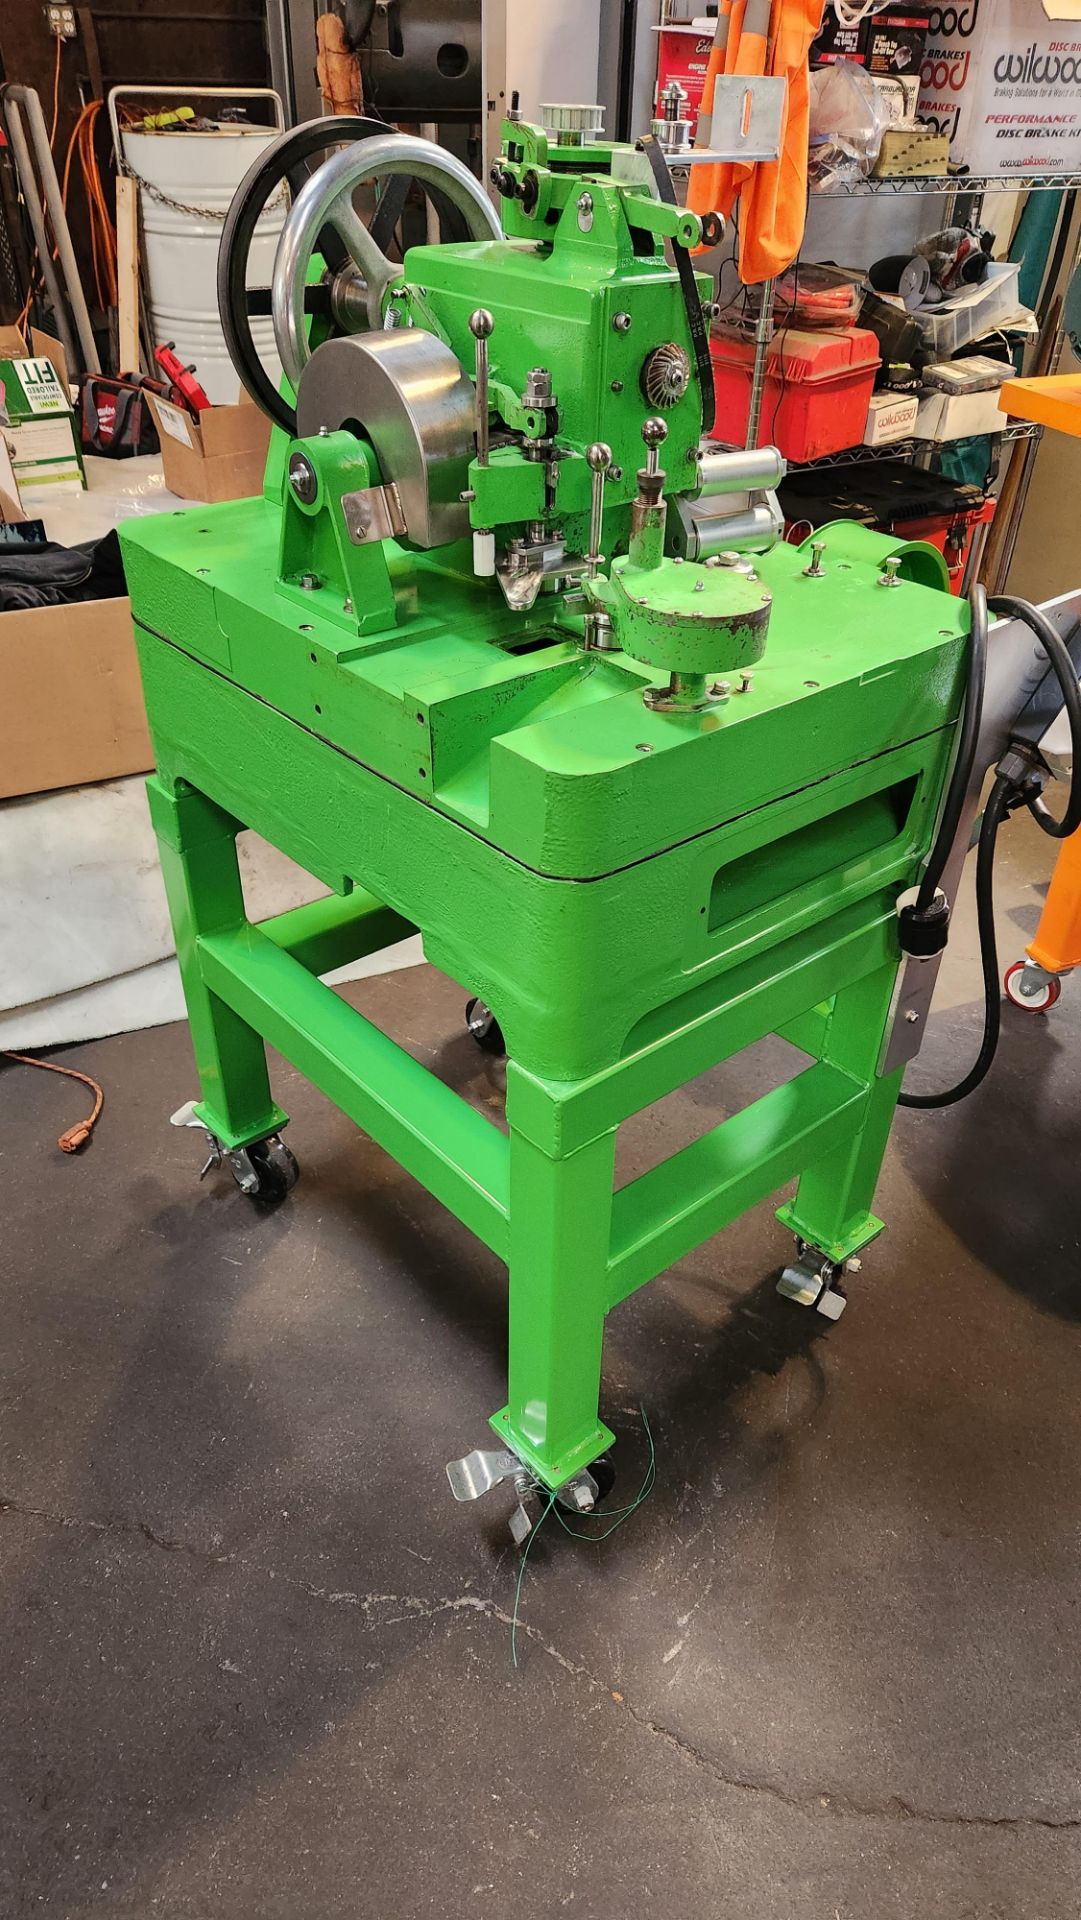 COLTON SINGLE PUNCH TABLET PRESS (TRITULATOR) GREEN - Image 5 of 5